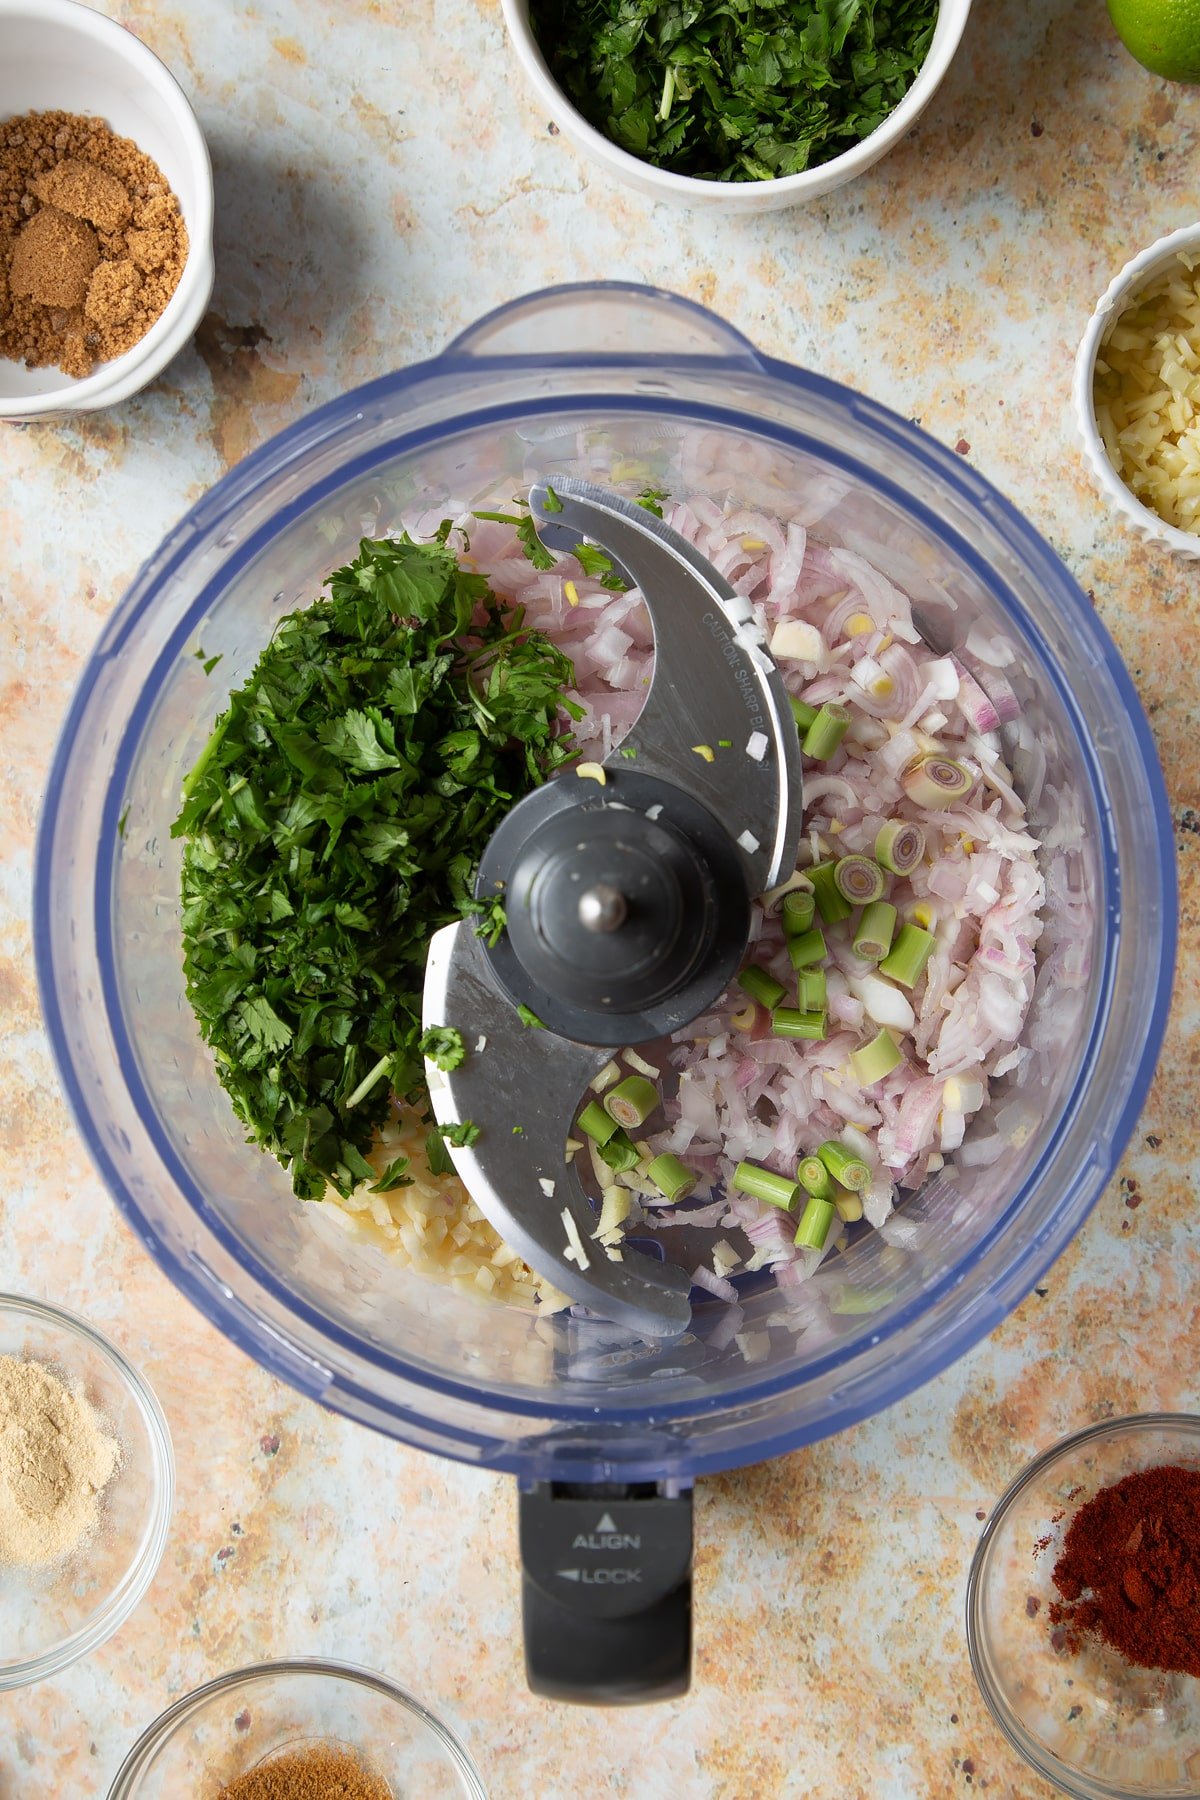 Chopped onion, ginger, garlic, coriander and lemon grass in a food processor bowl. Ingredients to make vegetarian yellow curry surround the bowl.